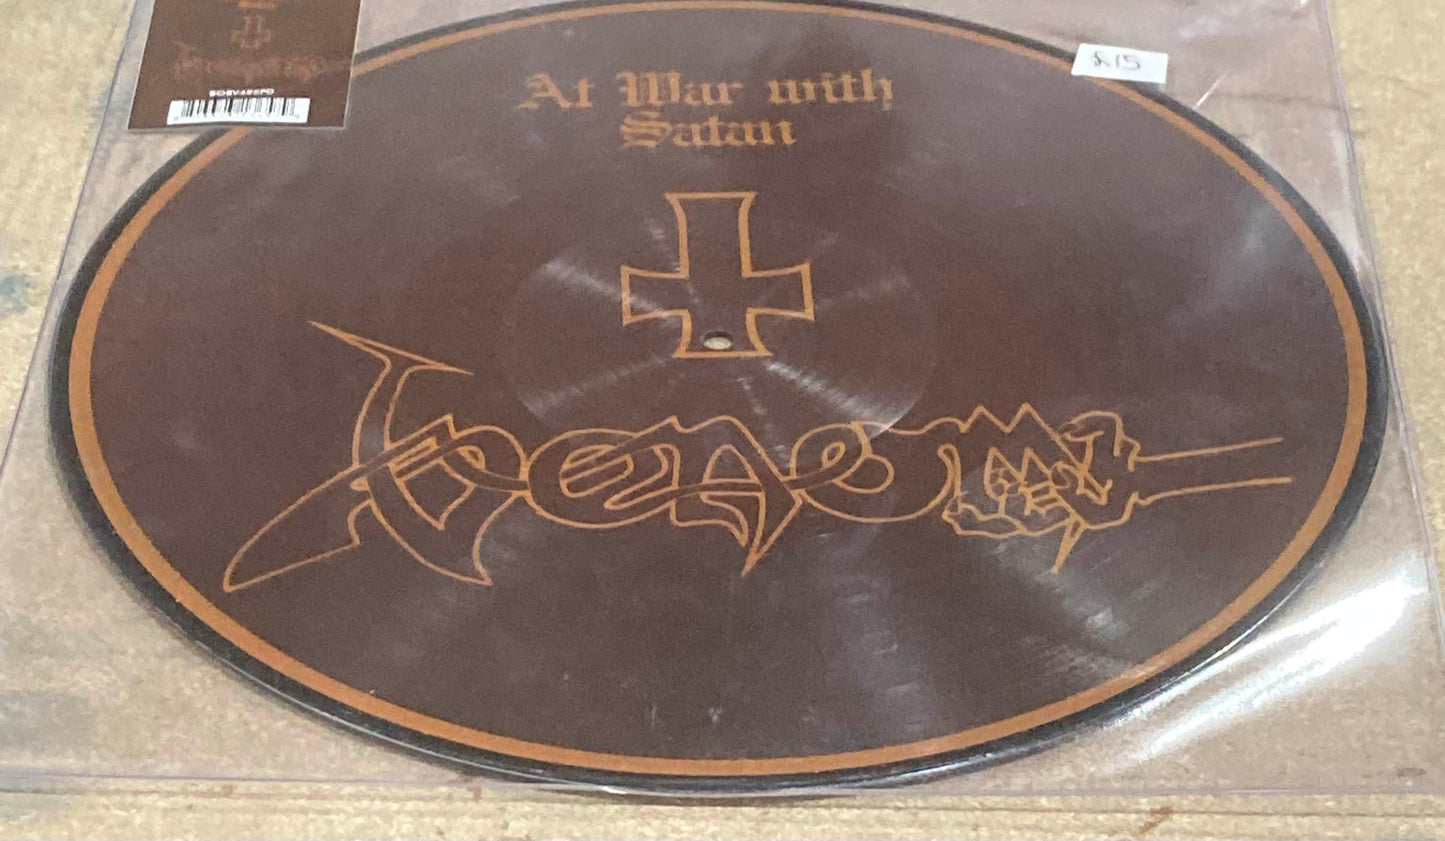 The front of Venom - At War With Satan on vinyl.